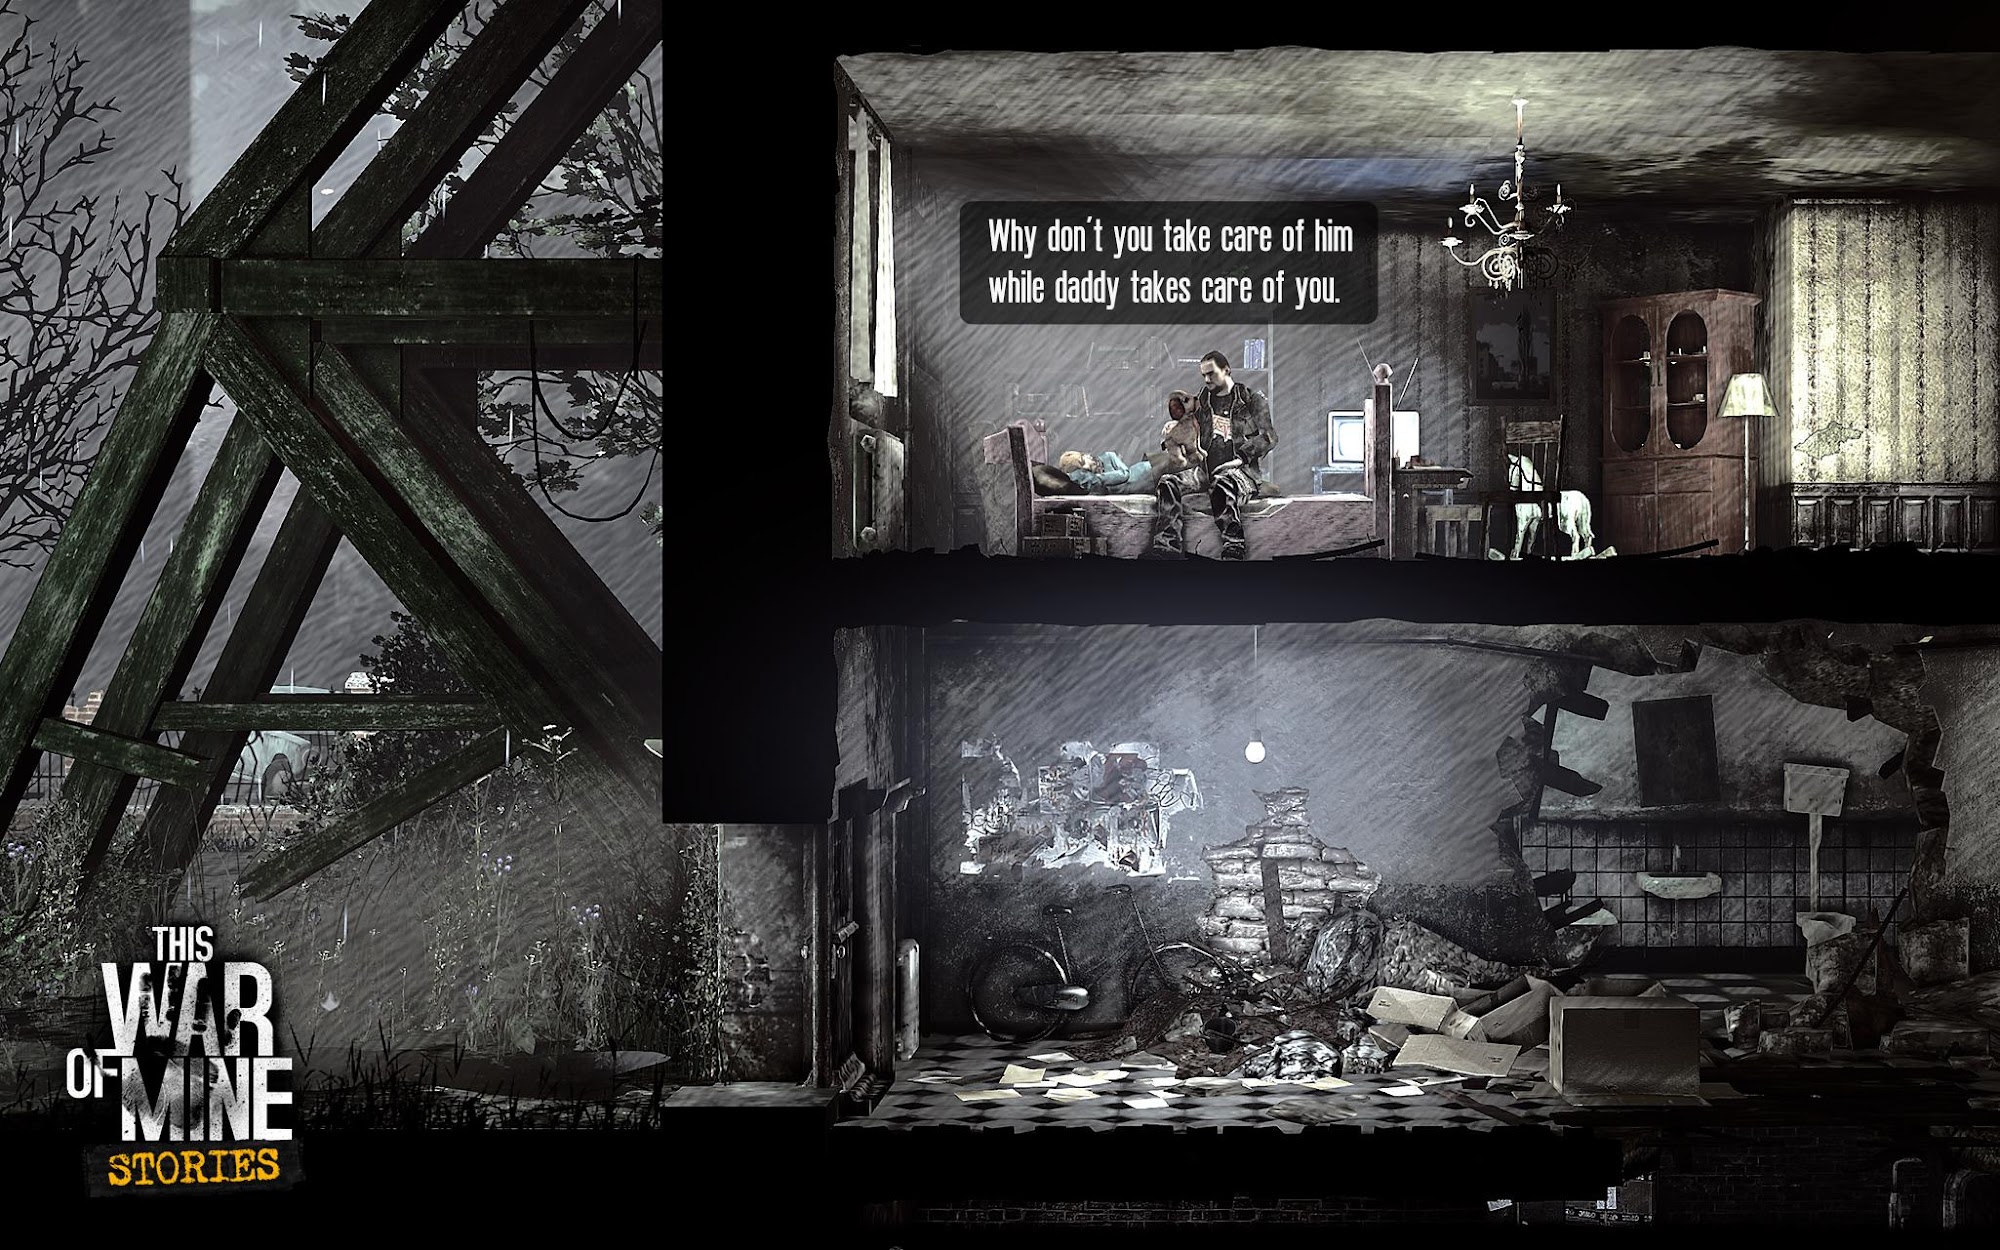 Scarica This War of Mine: Stories Ep 1 gratis per Android.